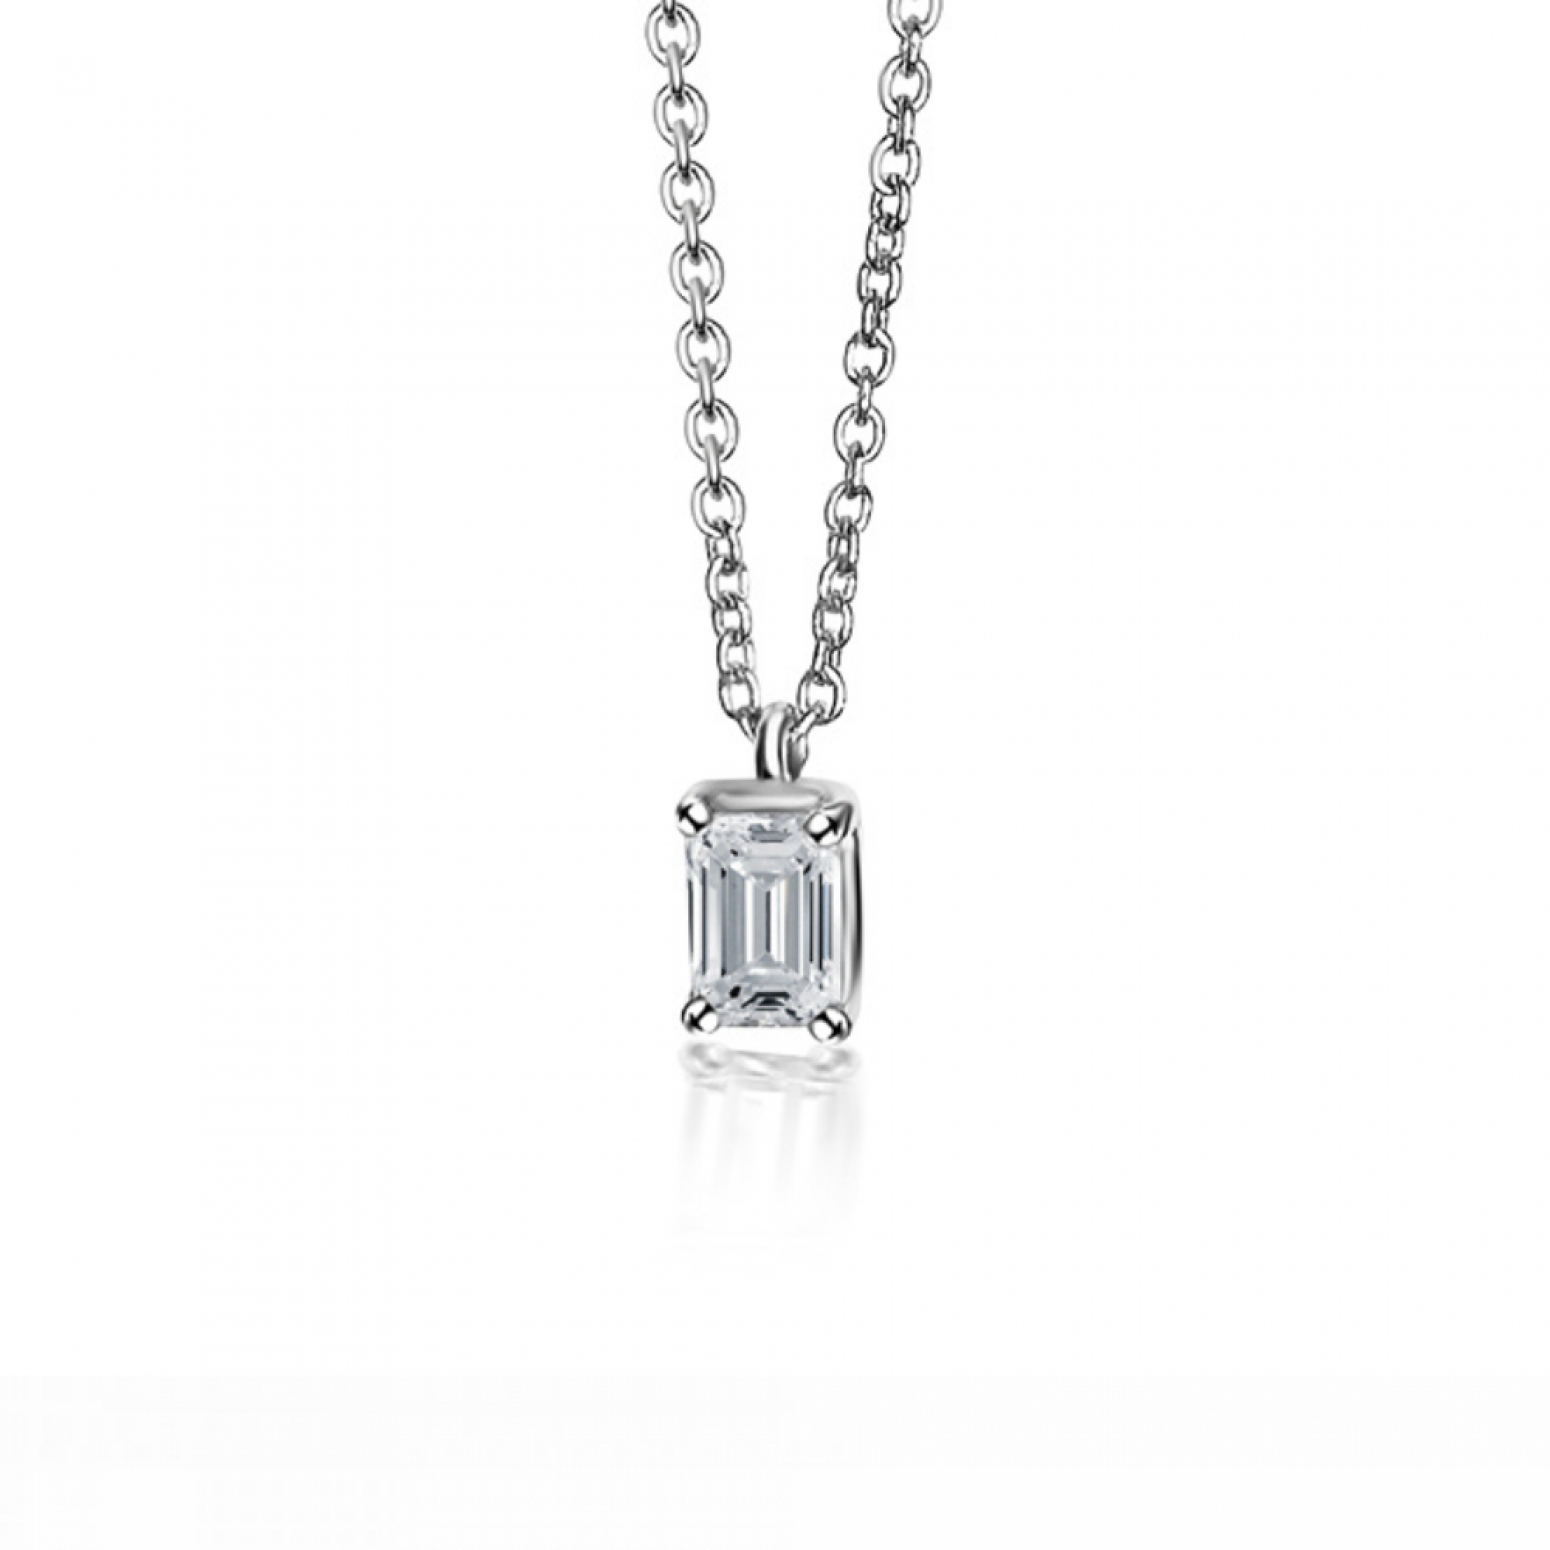 Solitaire necklace Κ18 white gold with diamond 0.31ct, VVS1, I from IGL ko4912 NECKLACES Κοσμηματα - chrilia.gr